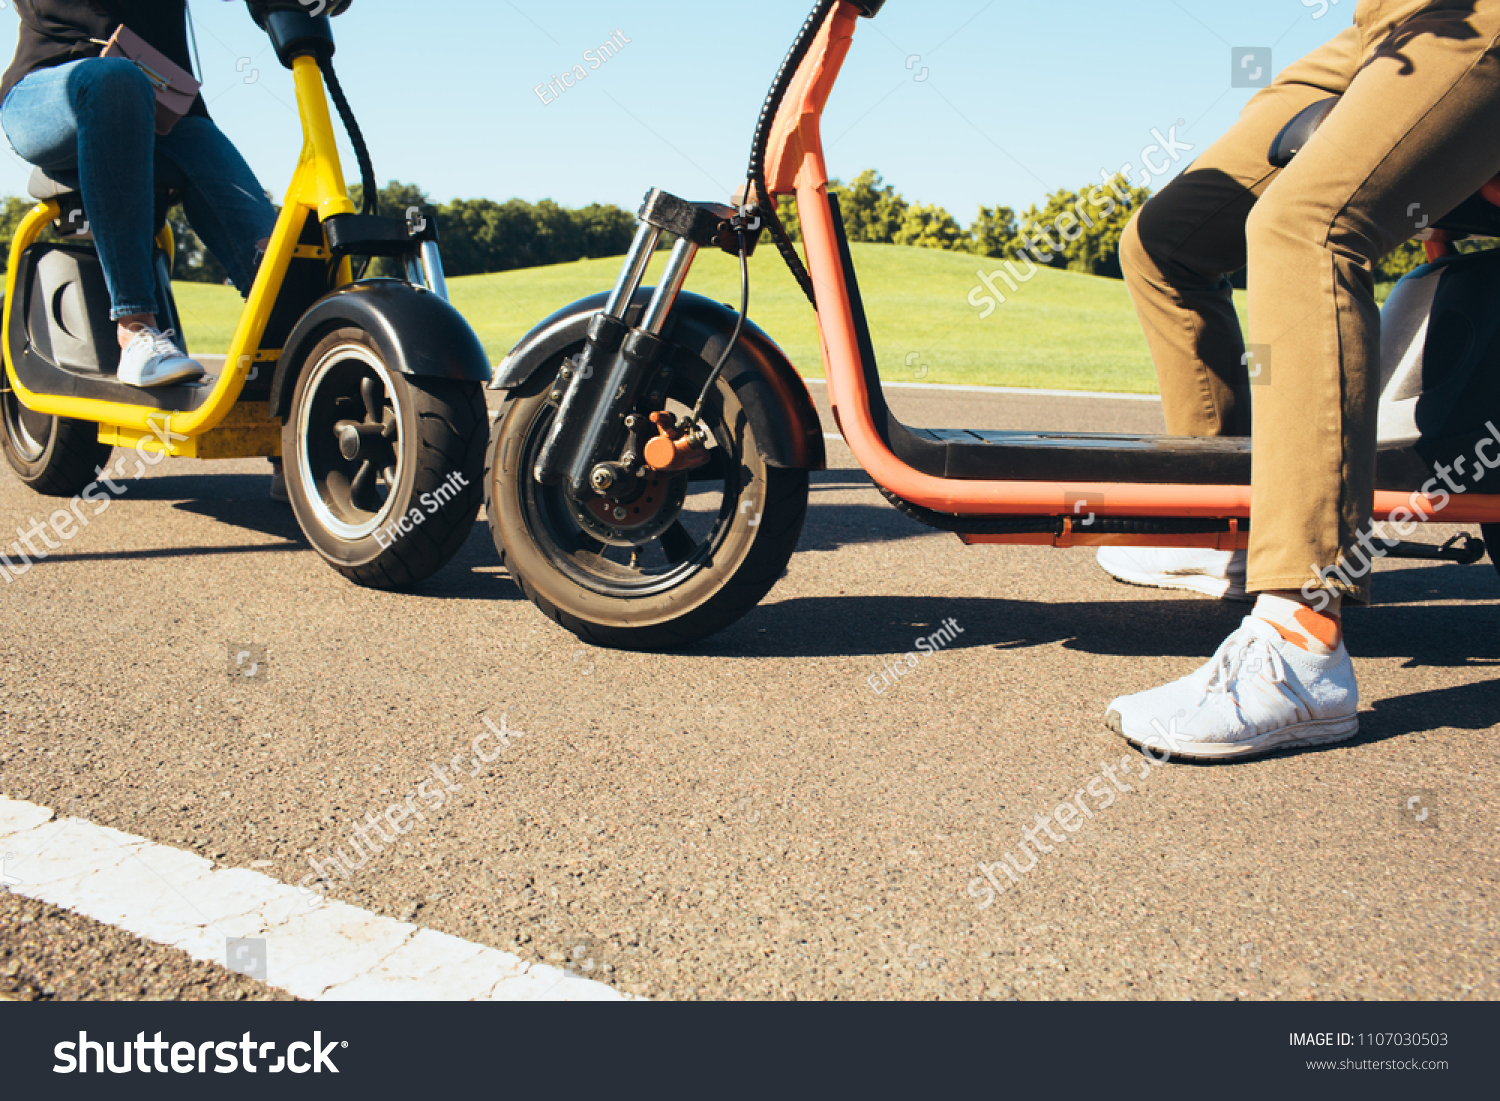 Rest Riding Electric Bike Electric Mobility Royalty Free Stock Image